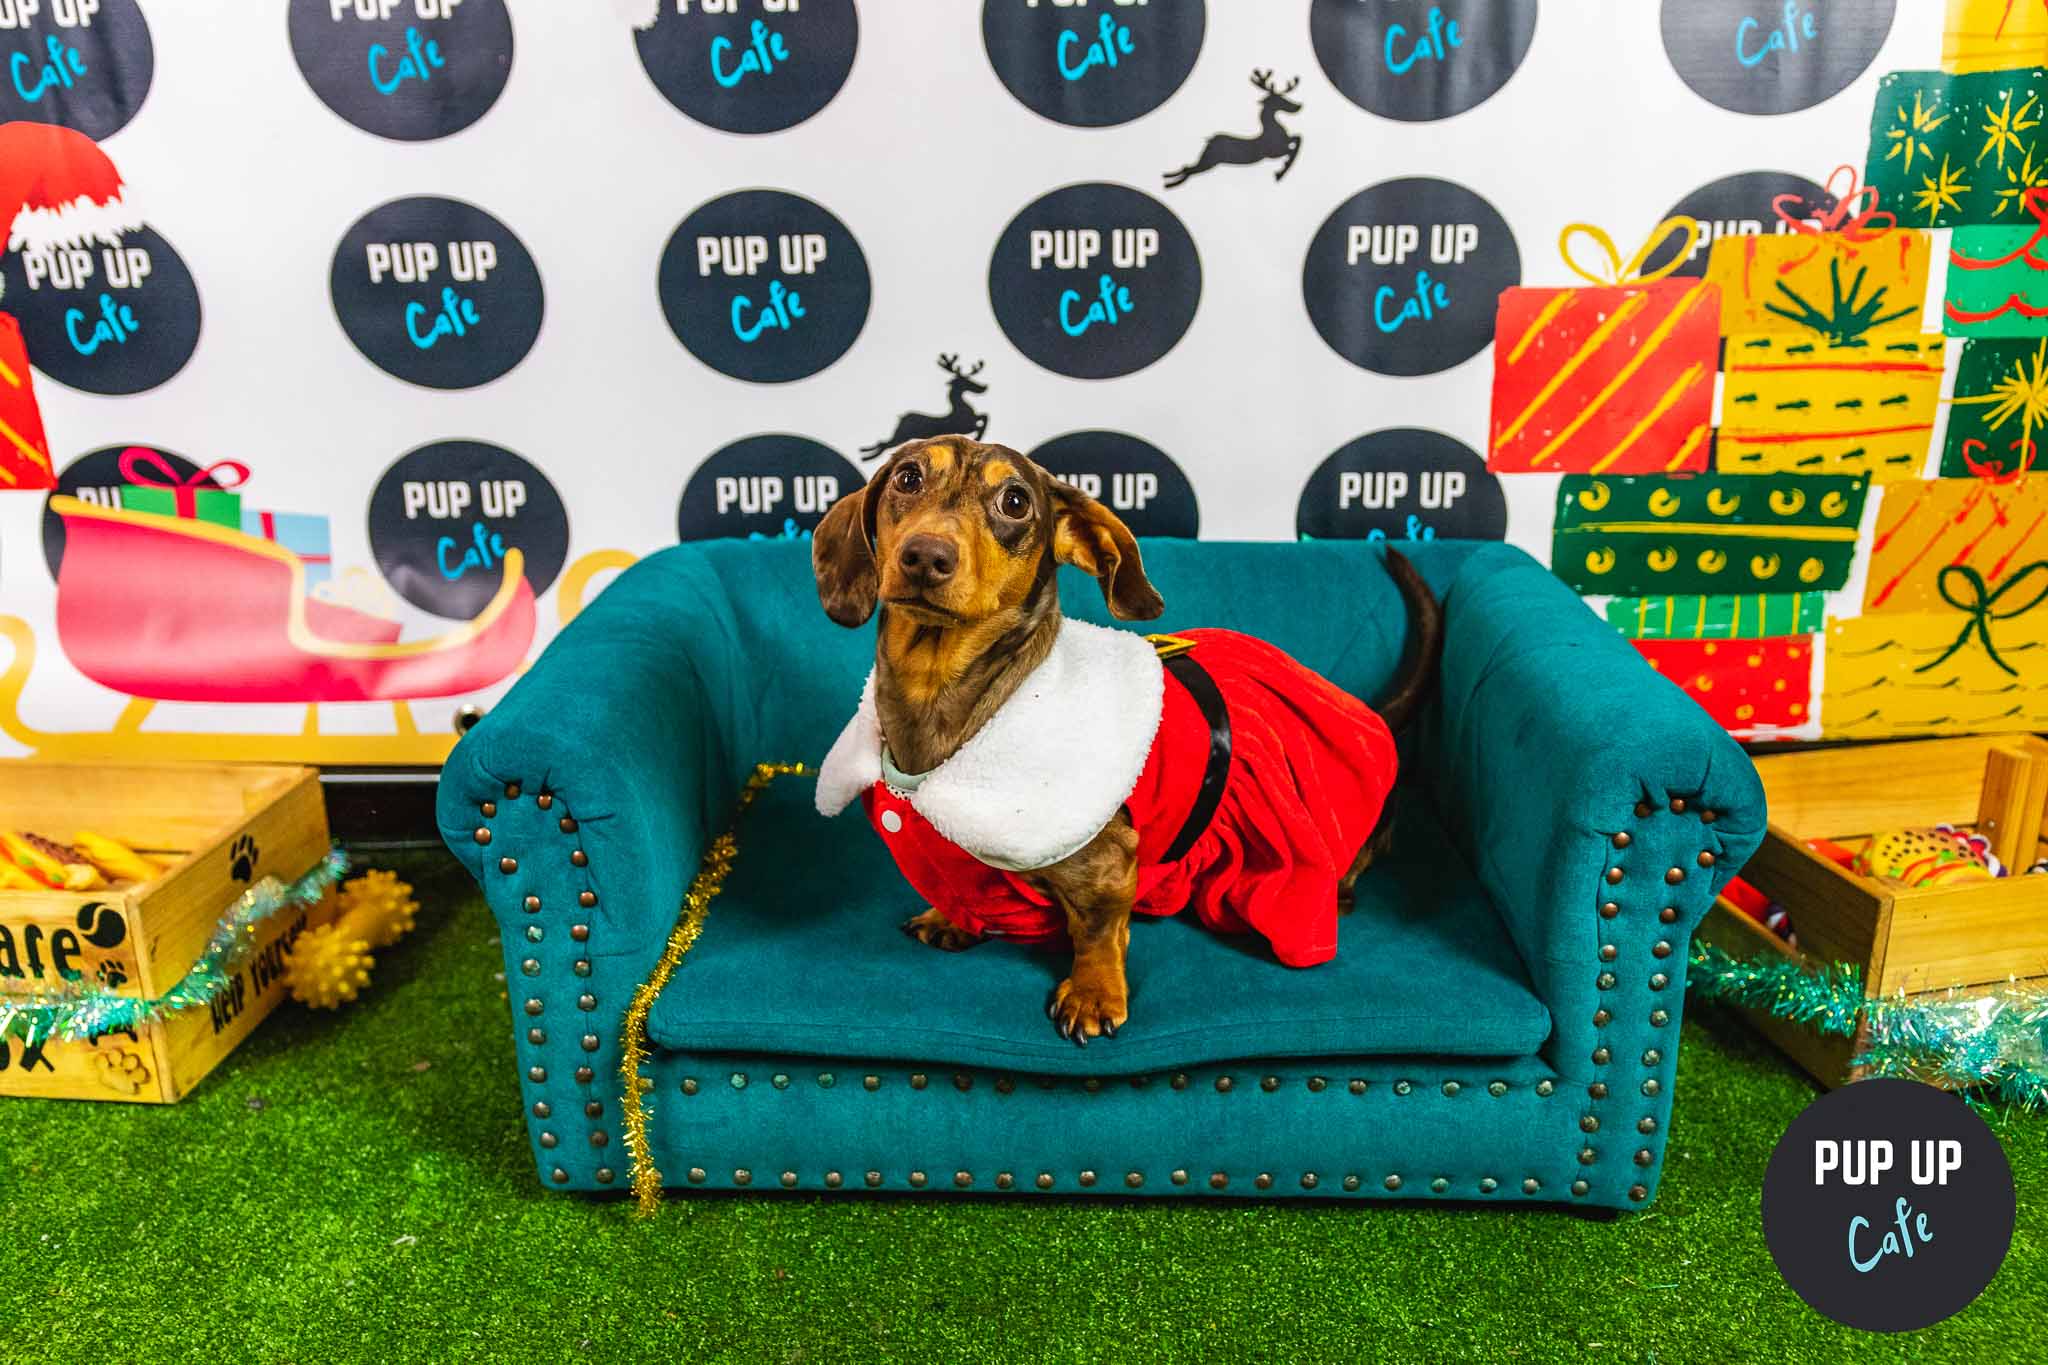 A dachshund dressed as Santa sits on a blue sofa inside the Pup Up Cafe event 